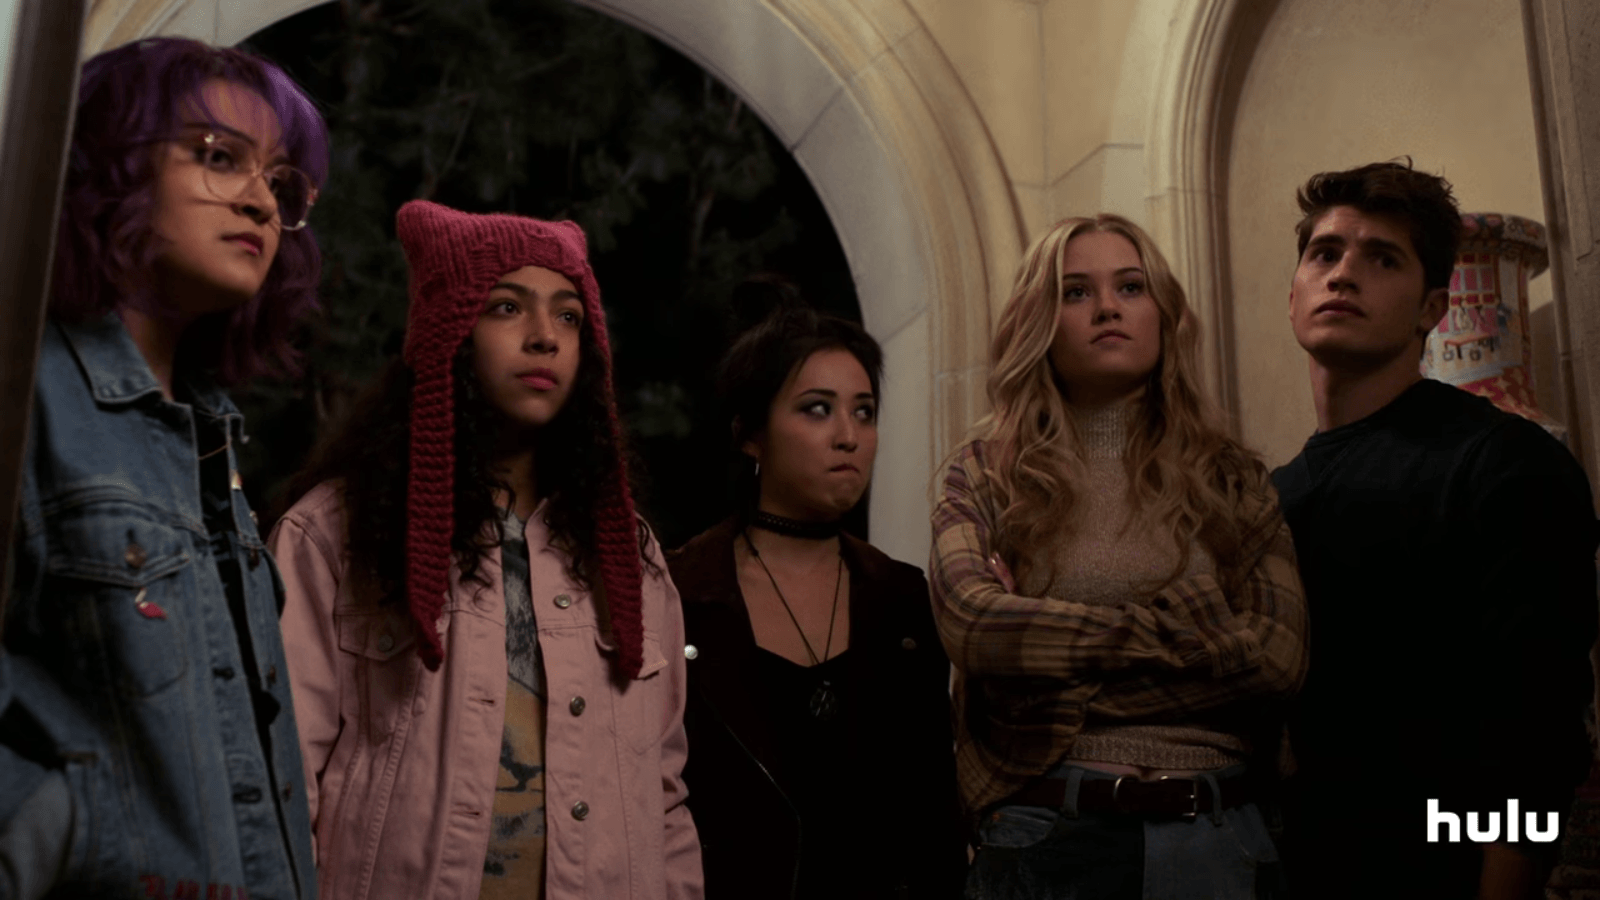 The Song In The Marvel's 'Runaways' Teaser Sets The Tone